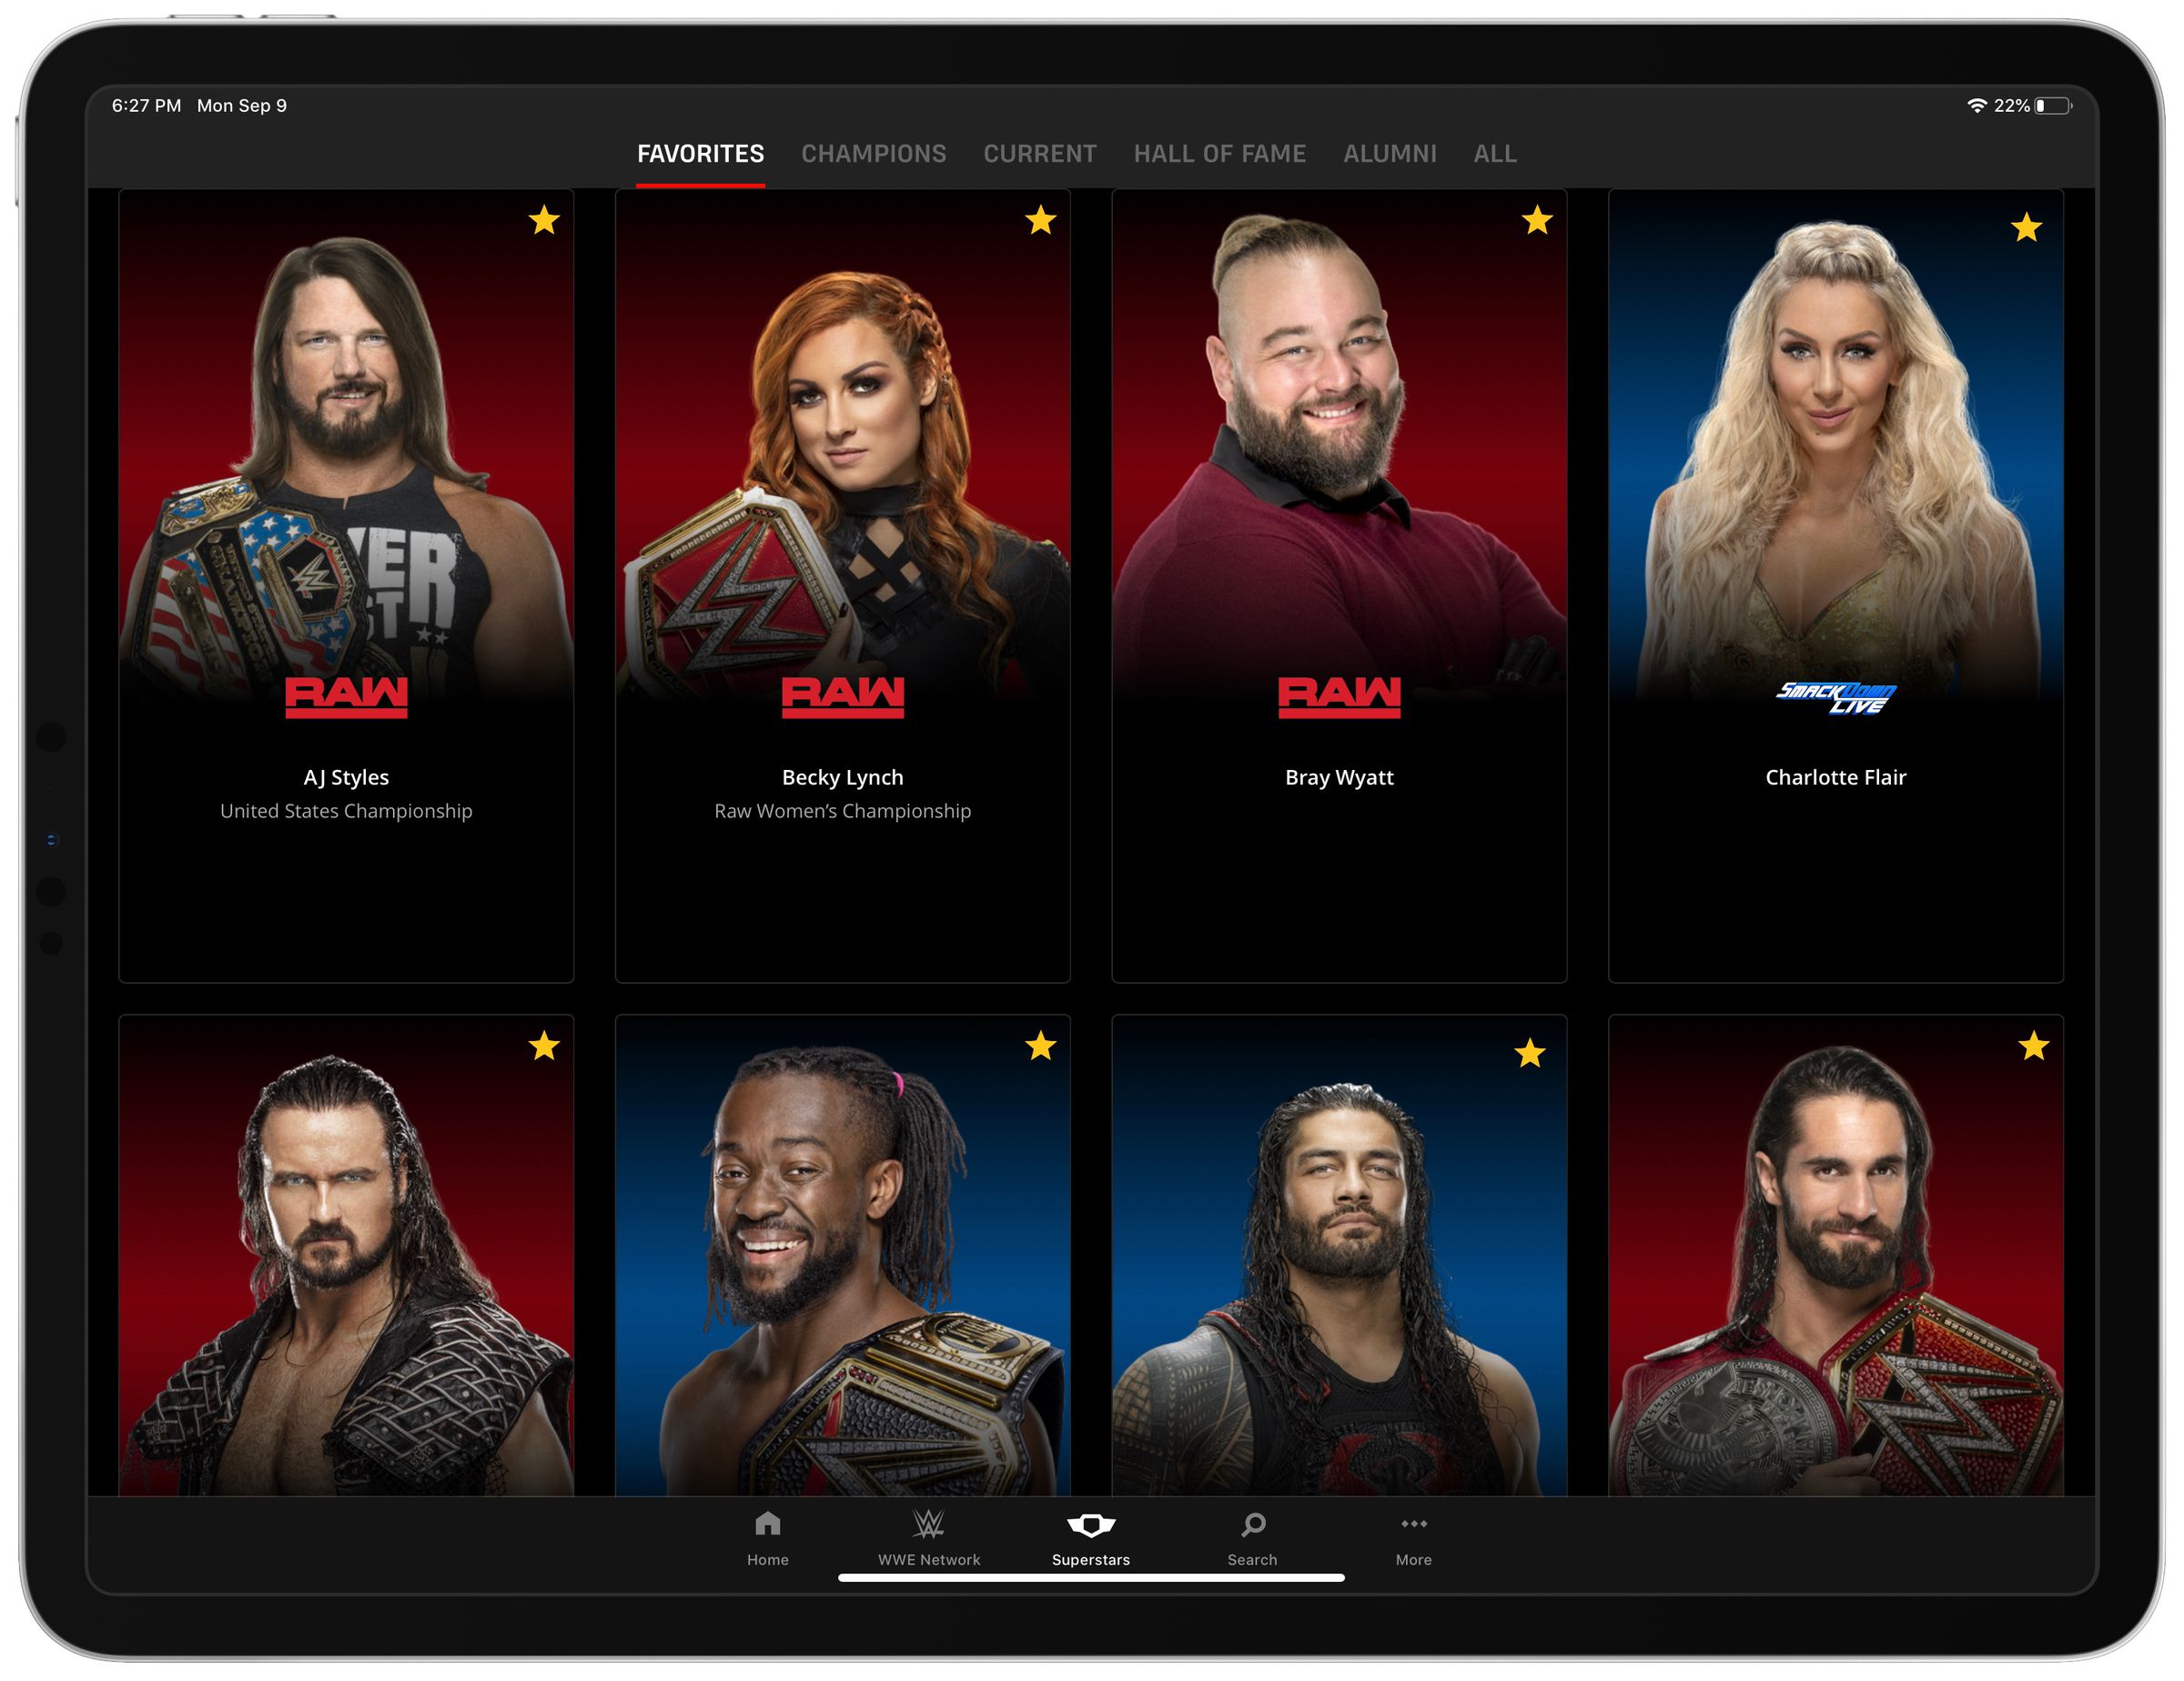 The new Superstars section lets subscribers track their favorite WWE performers.